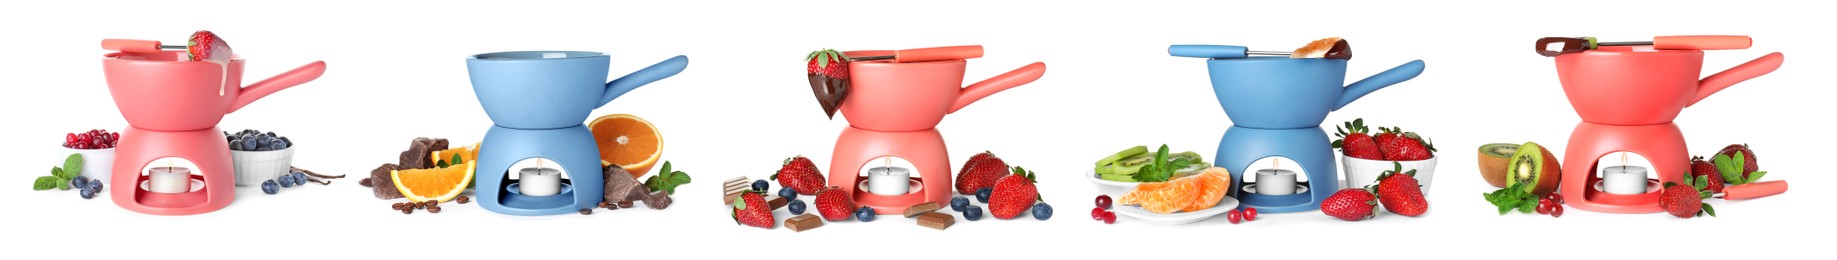 Set with fondue pots with chocolate and fruits on white background. Banner design